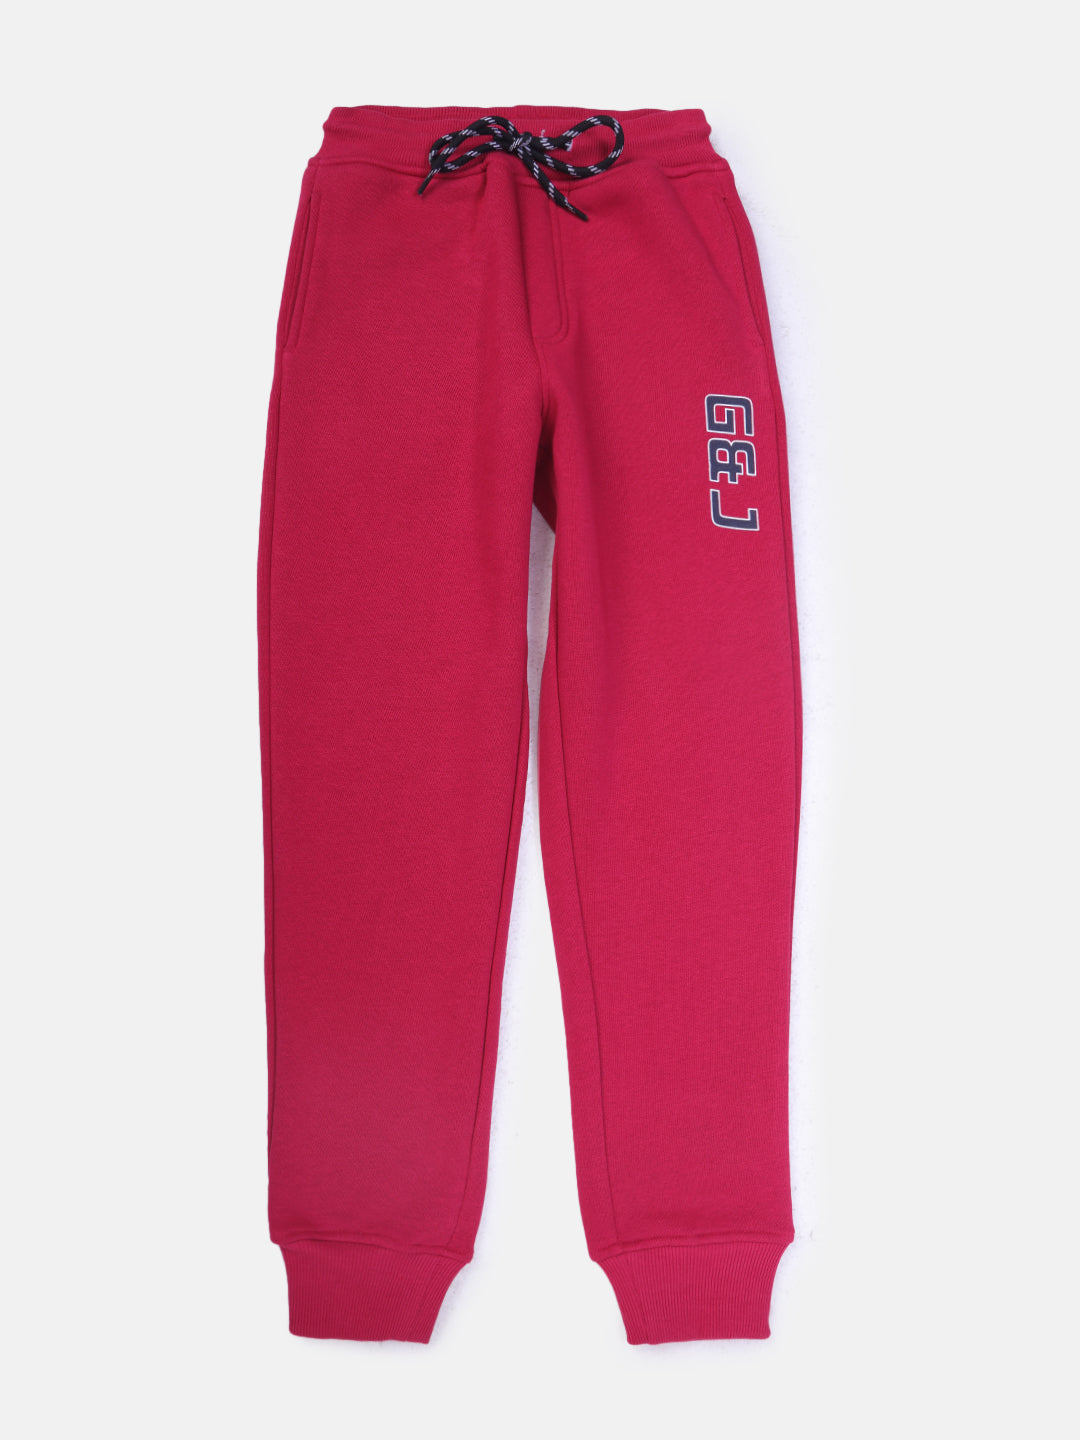 Boys Pink Printed Cotton Track Pant